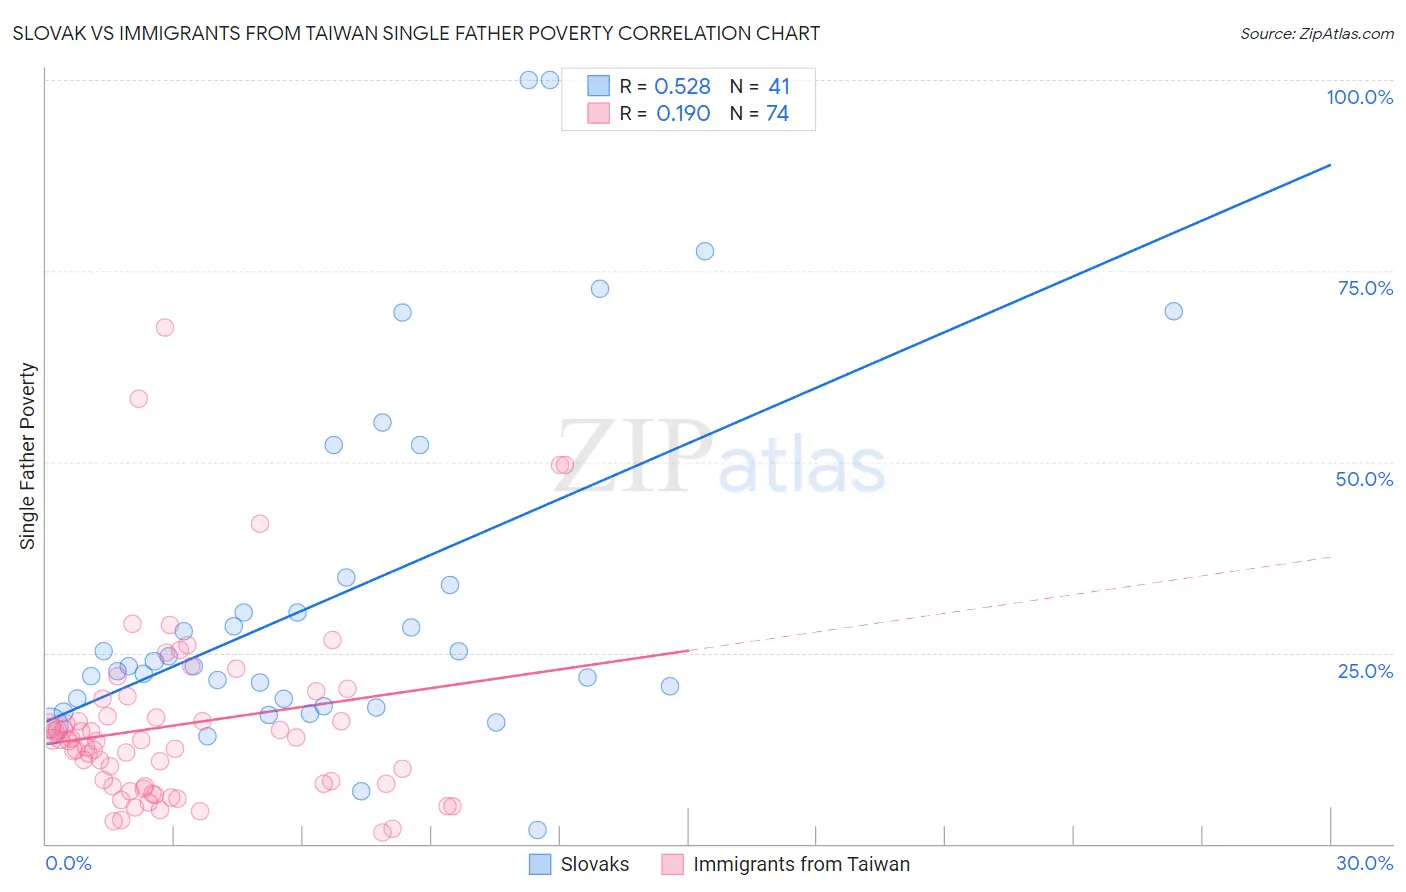 Slovak vs Immigrants from Taiwan Single Father Poverty